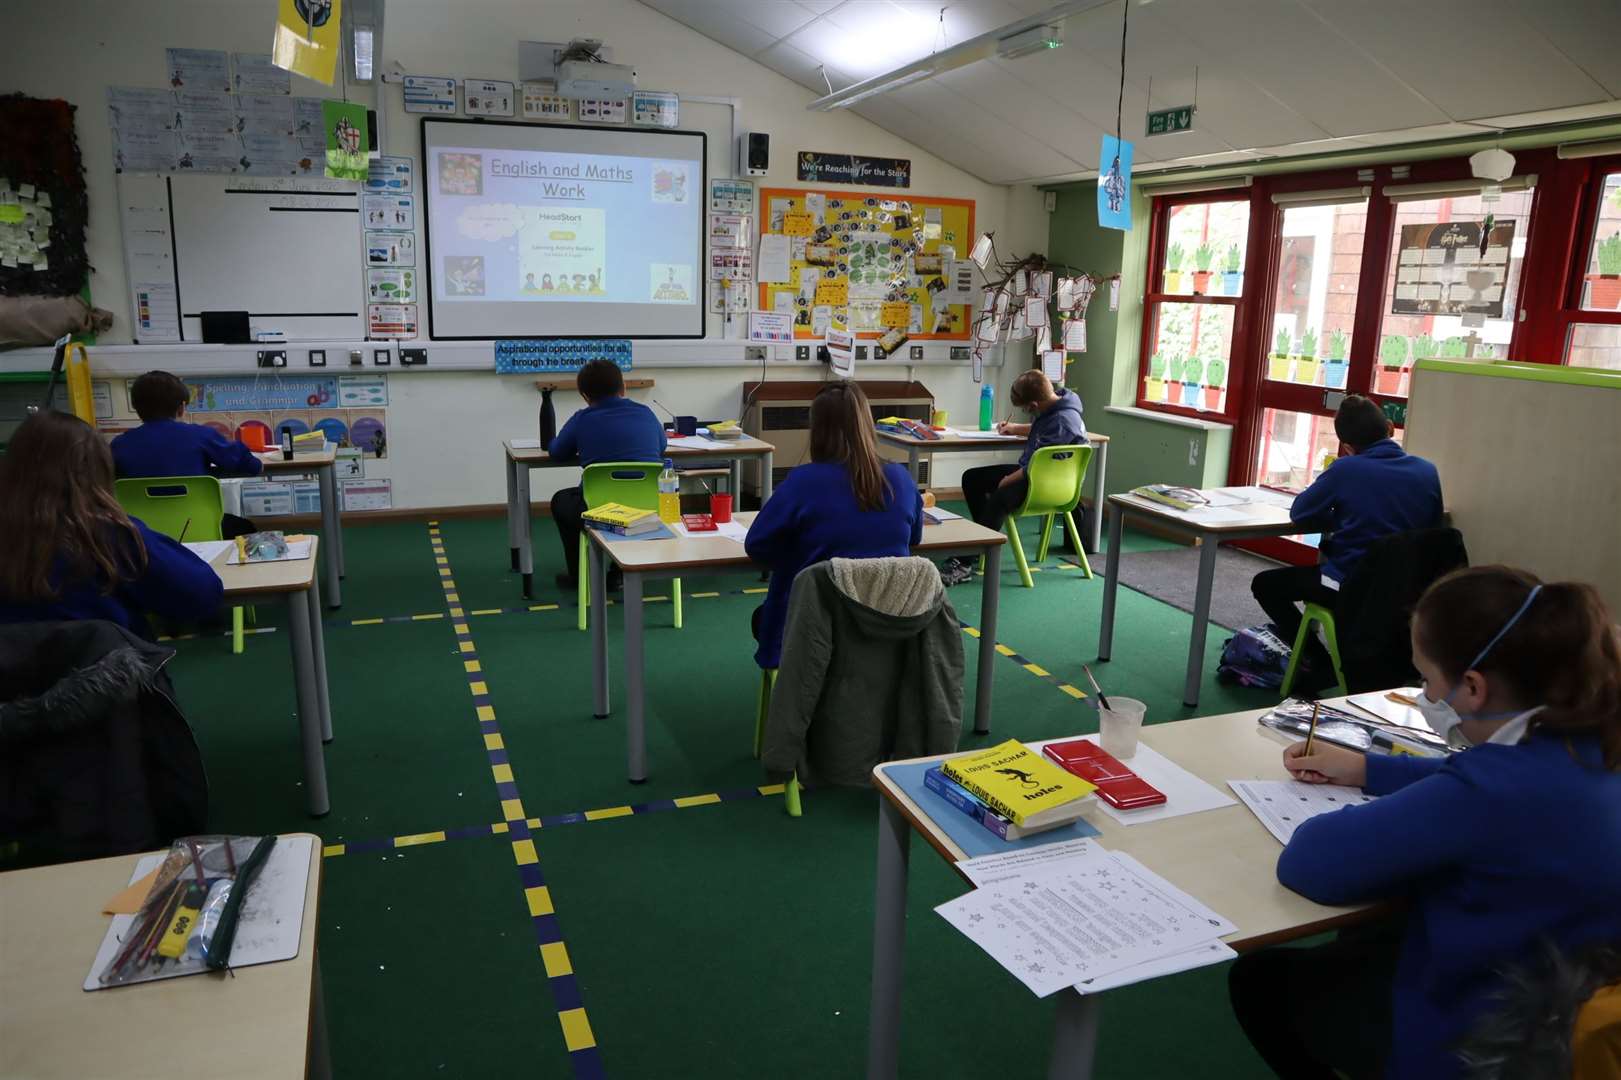 Year 6 settling down to lessons in their new-look classroom at St George's CE Primary School in Minster, Sheppey